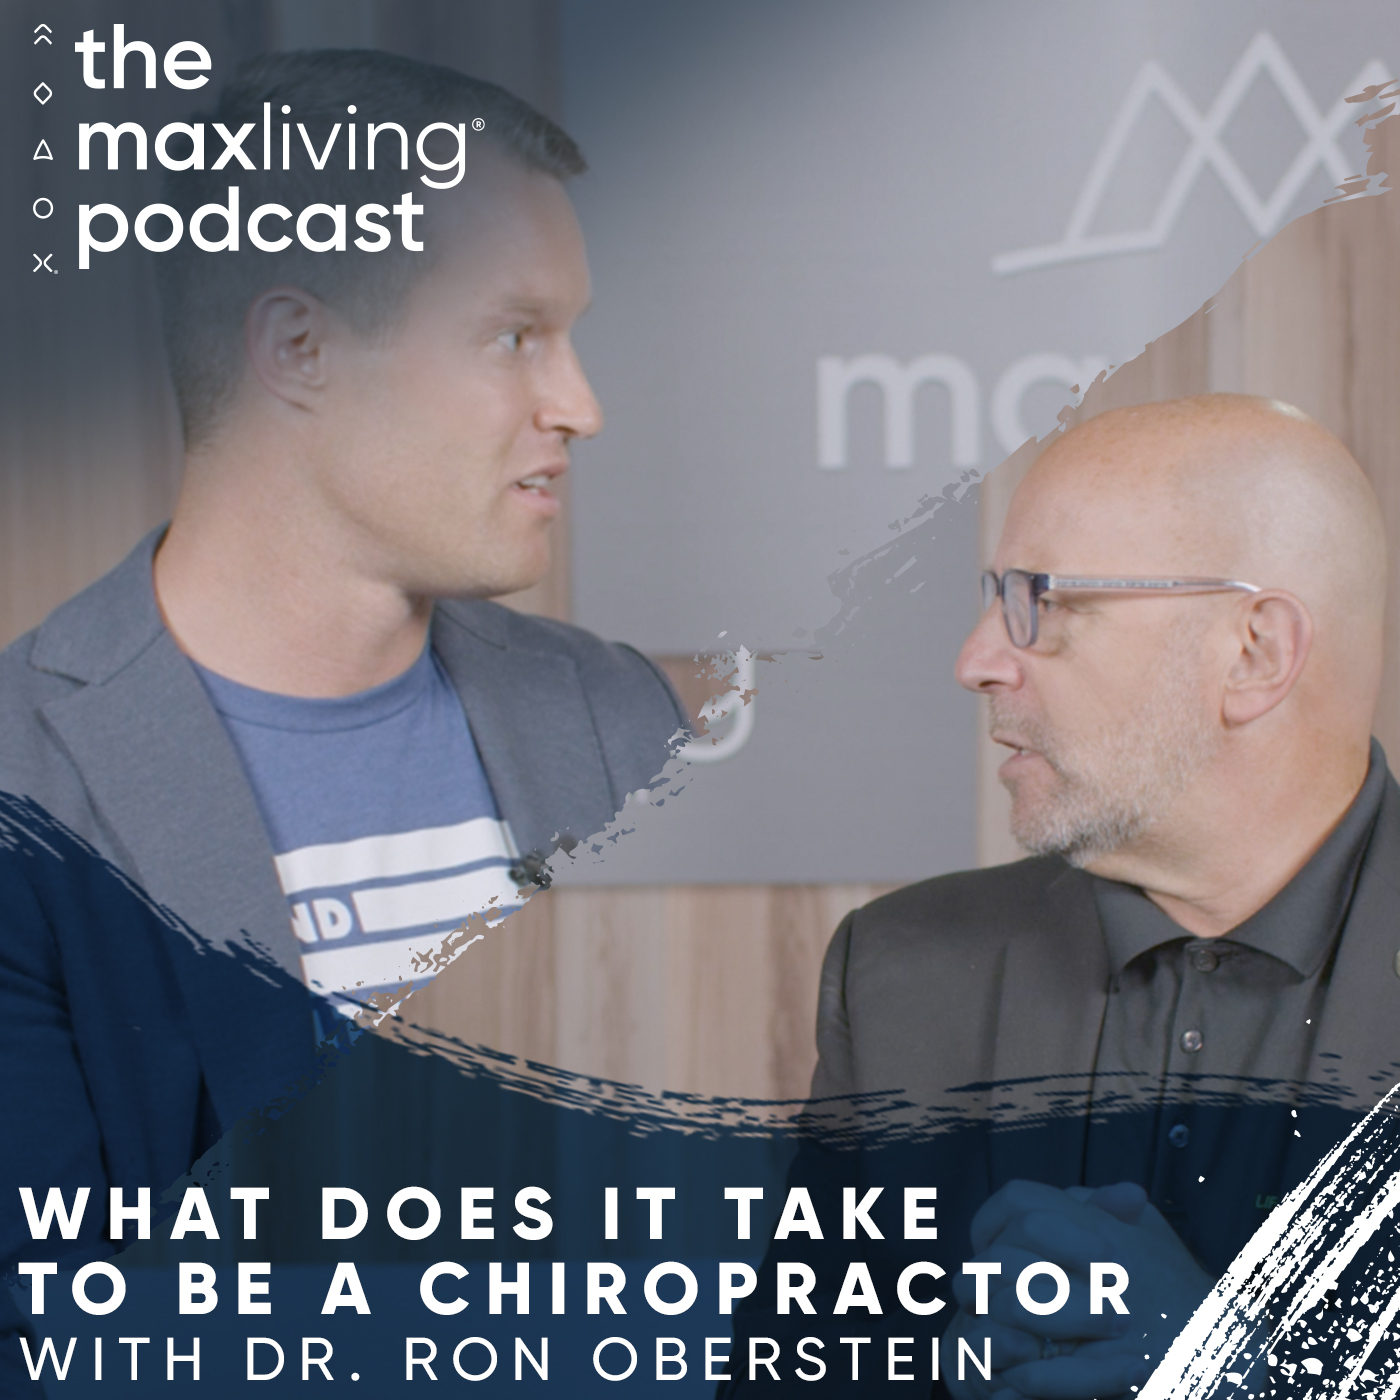 What Does It Take to Be a Chiropractor? with Dr. Ron Oberstein